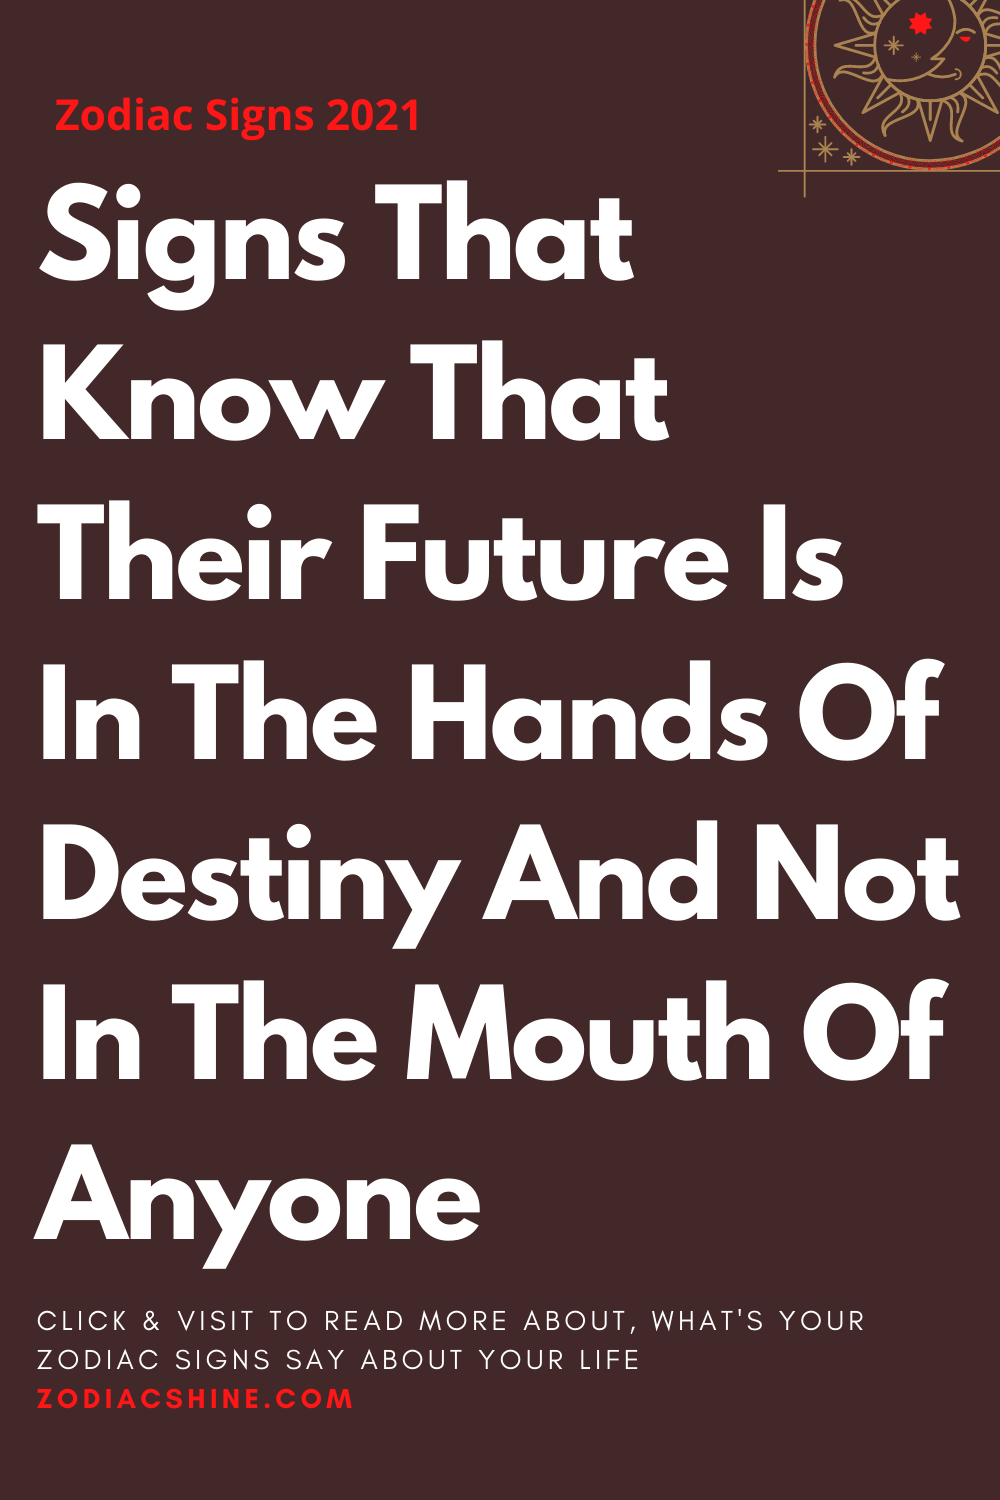 Signs That Know That Their Future Is In The Hands Of Destiny And Not In The Mouth Of Anyone